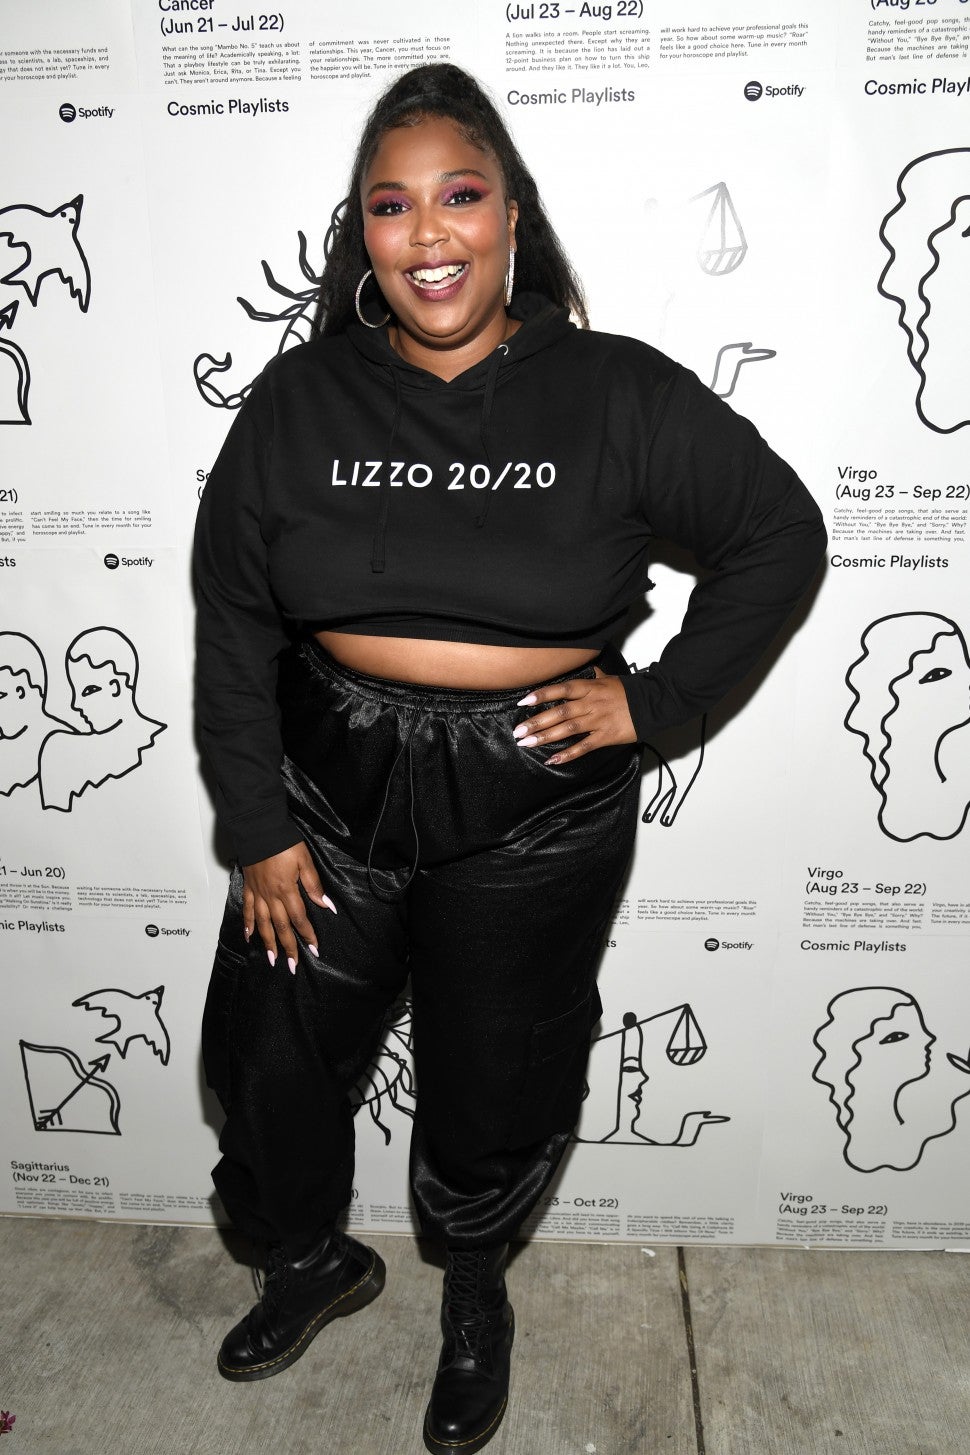 Lizzo at spotify show